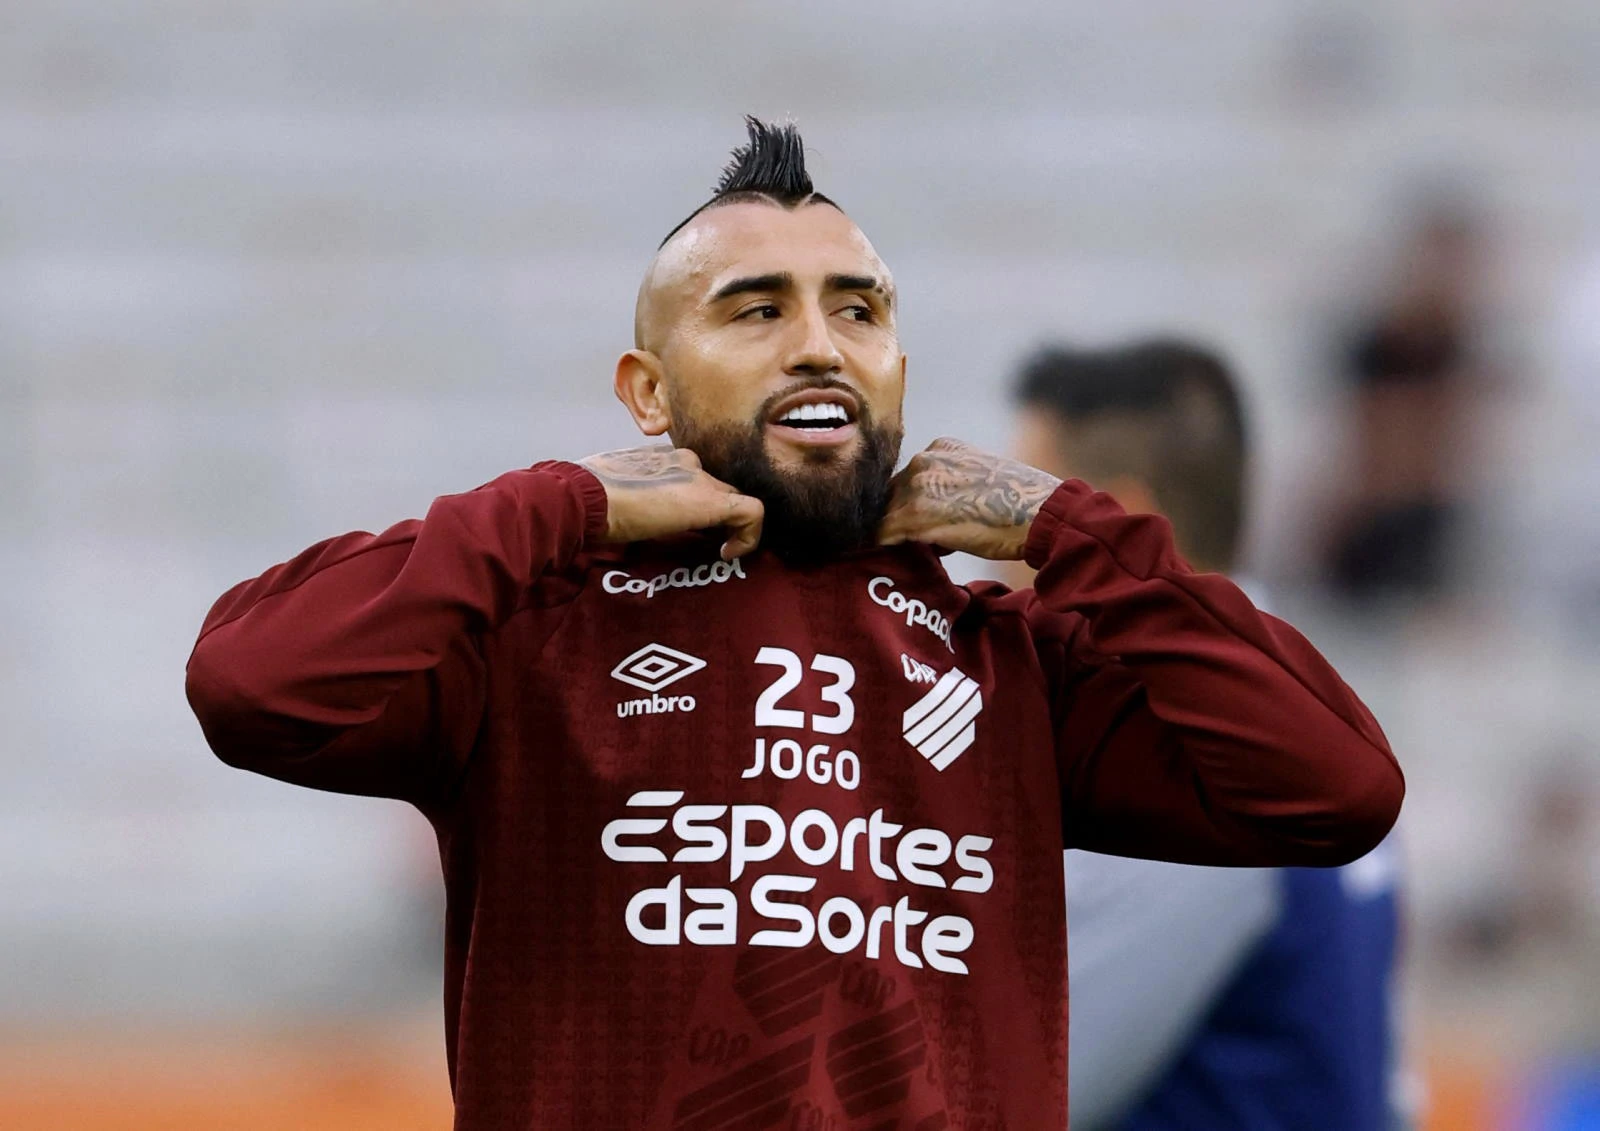 Arturo Vidal wasn’t exactly entertained by the recent game between Milan and Newcastle United: "The worst match in UCL history."